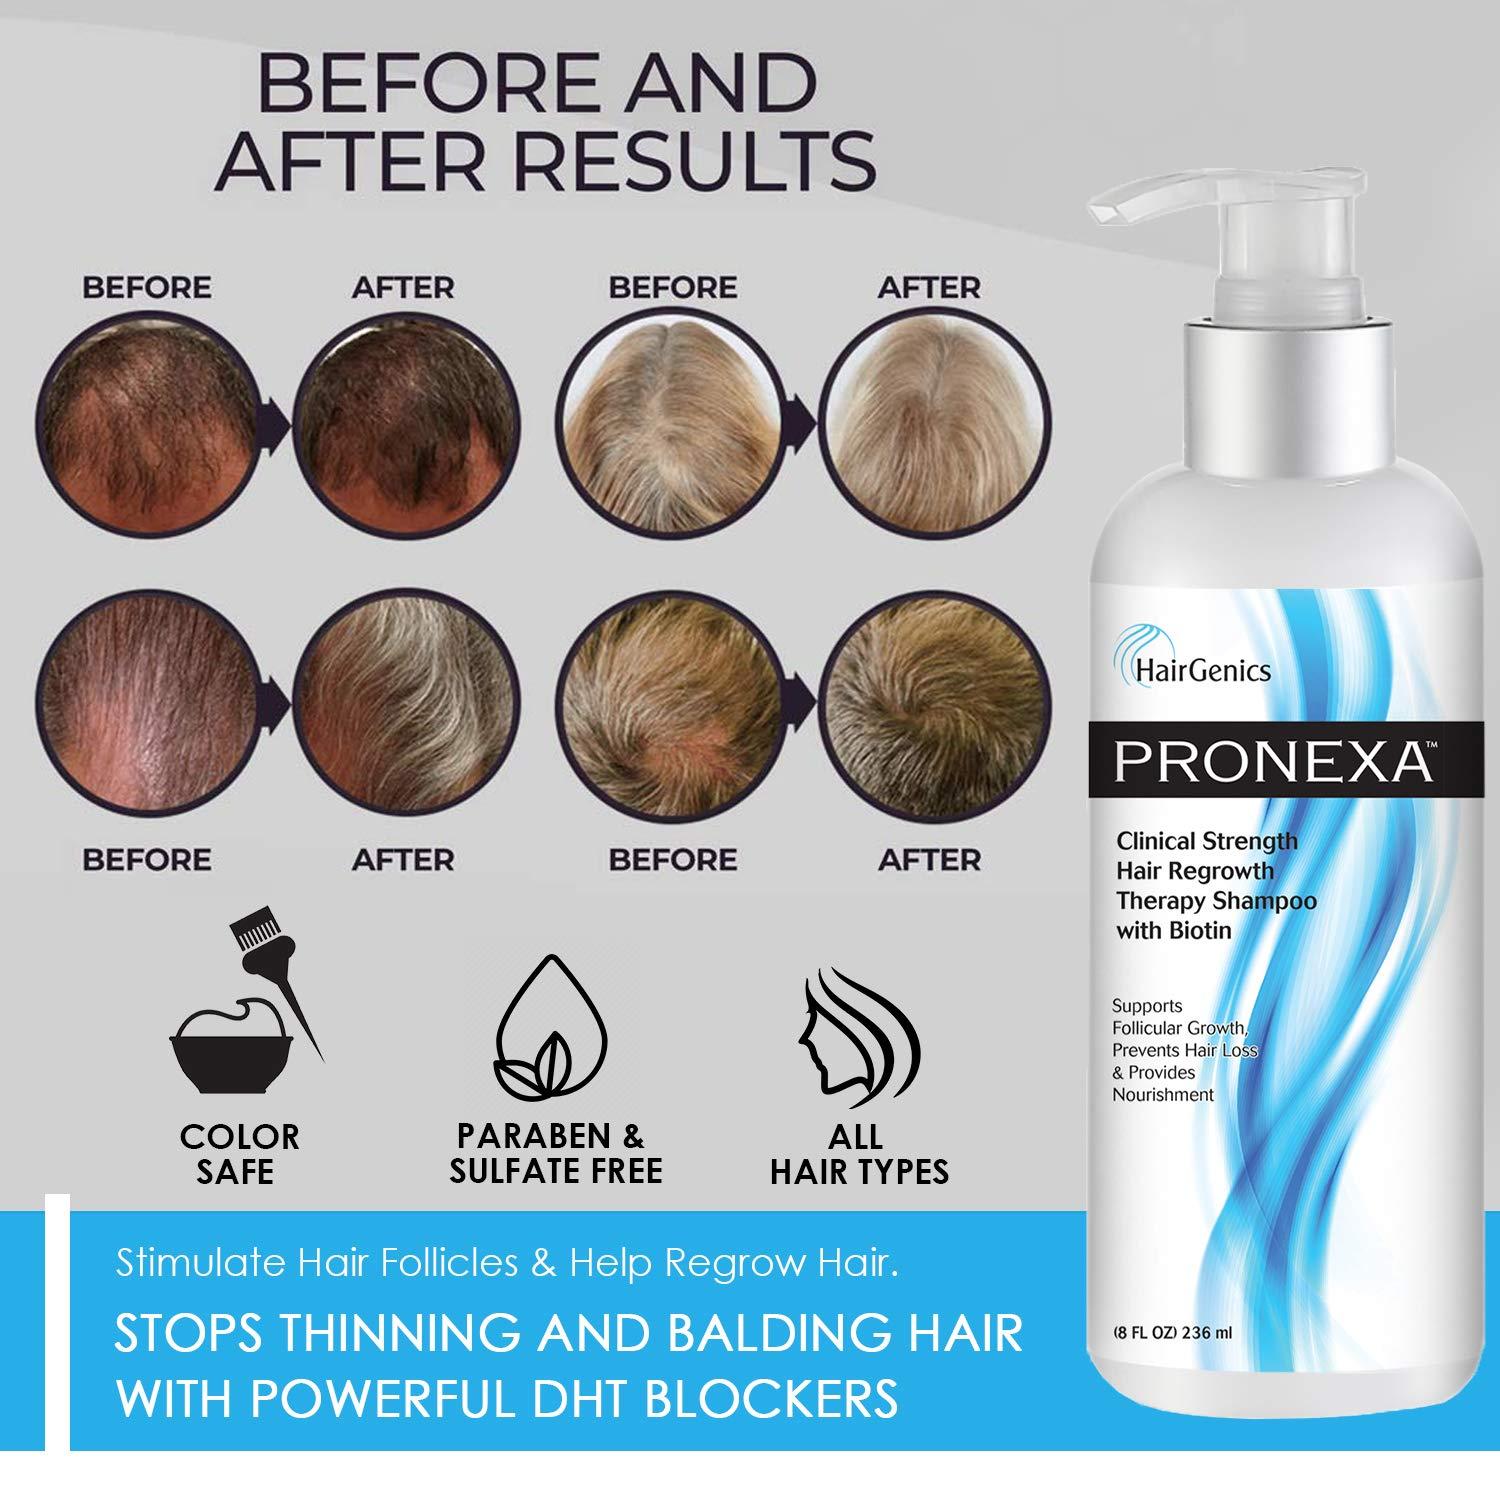 Hairgenics Pronexa Clinical Strength Hair Growth & Regrowth Therapy Hair  Loss Shampoo With Biotin, Collagen, and DHT Blockers for Thinning Hair, 8  fl. oz.